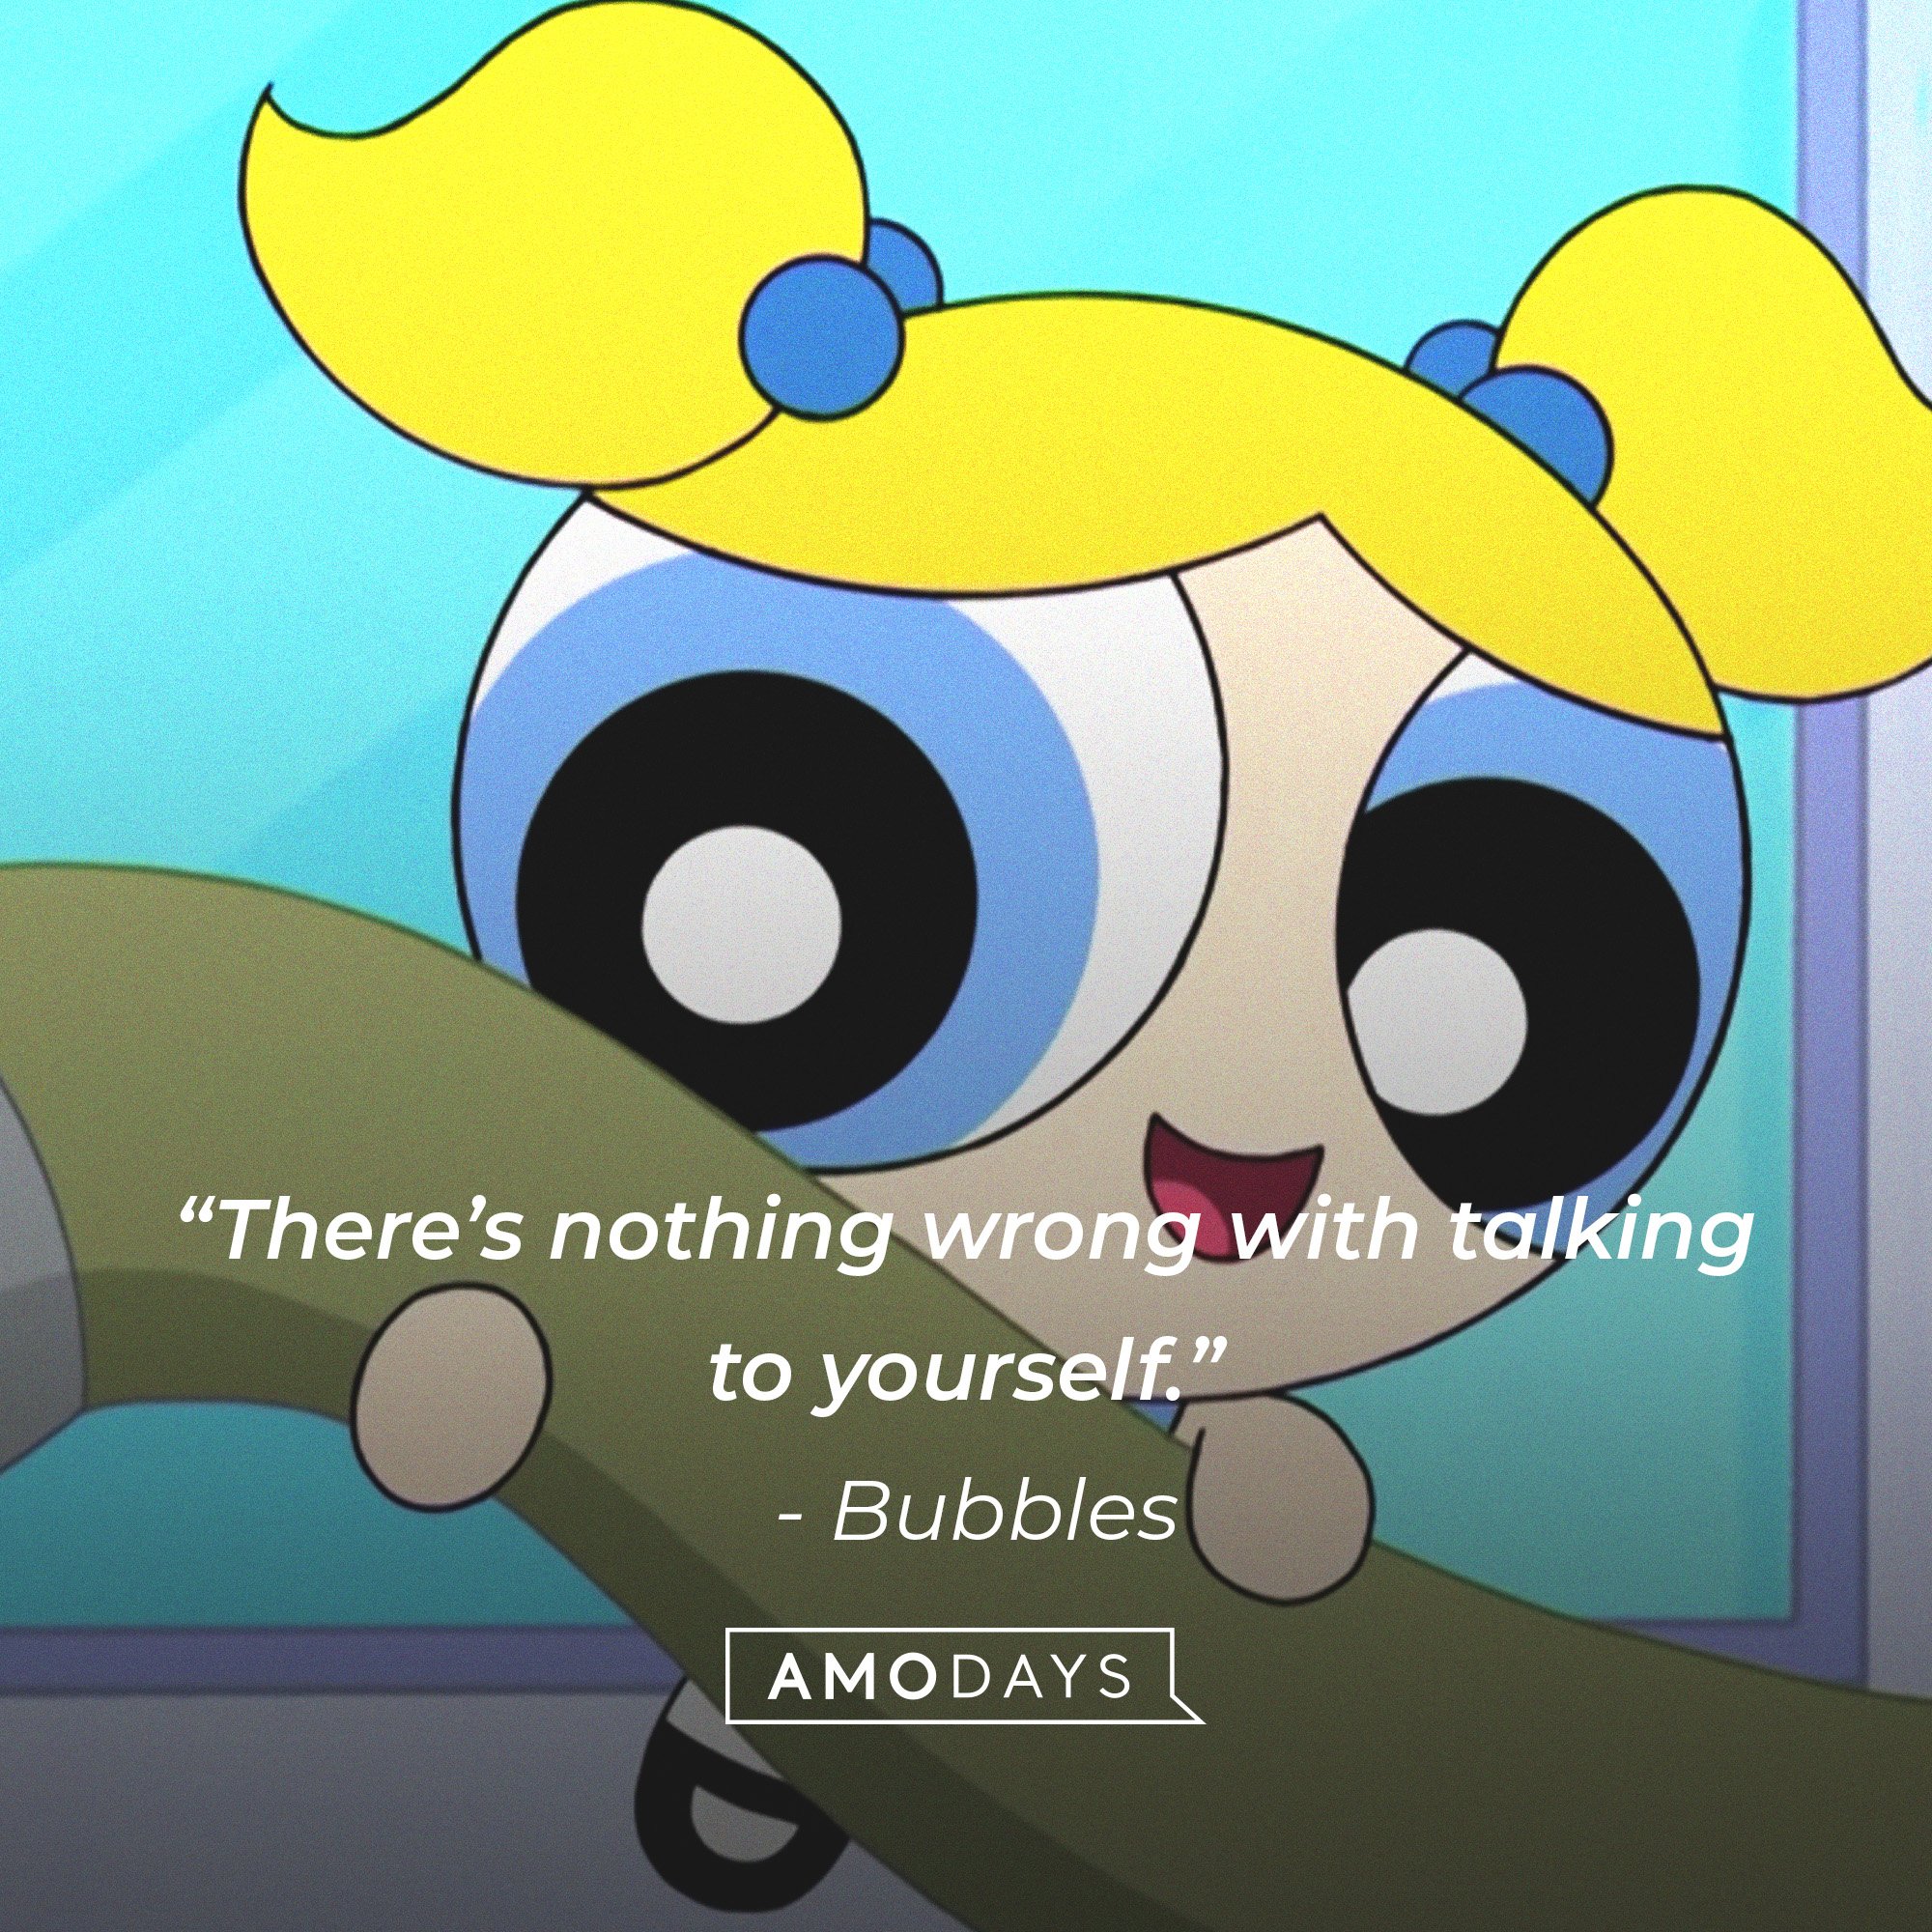 Bubble’s quote: “There’s nothing wrong with talking to yourself.”  | Image: AmoDays